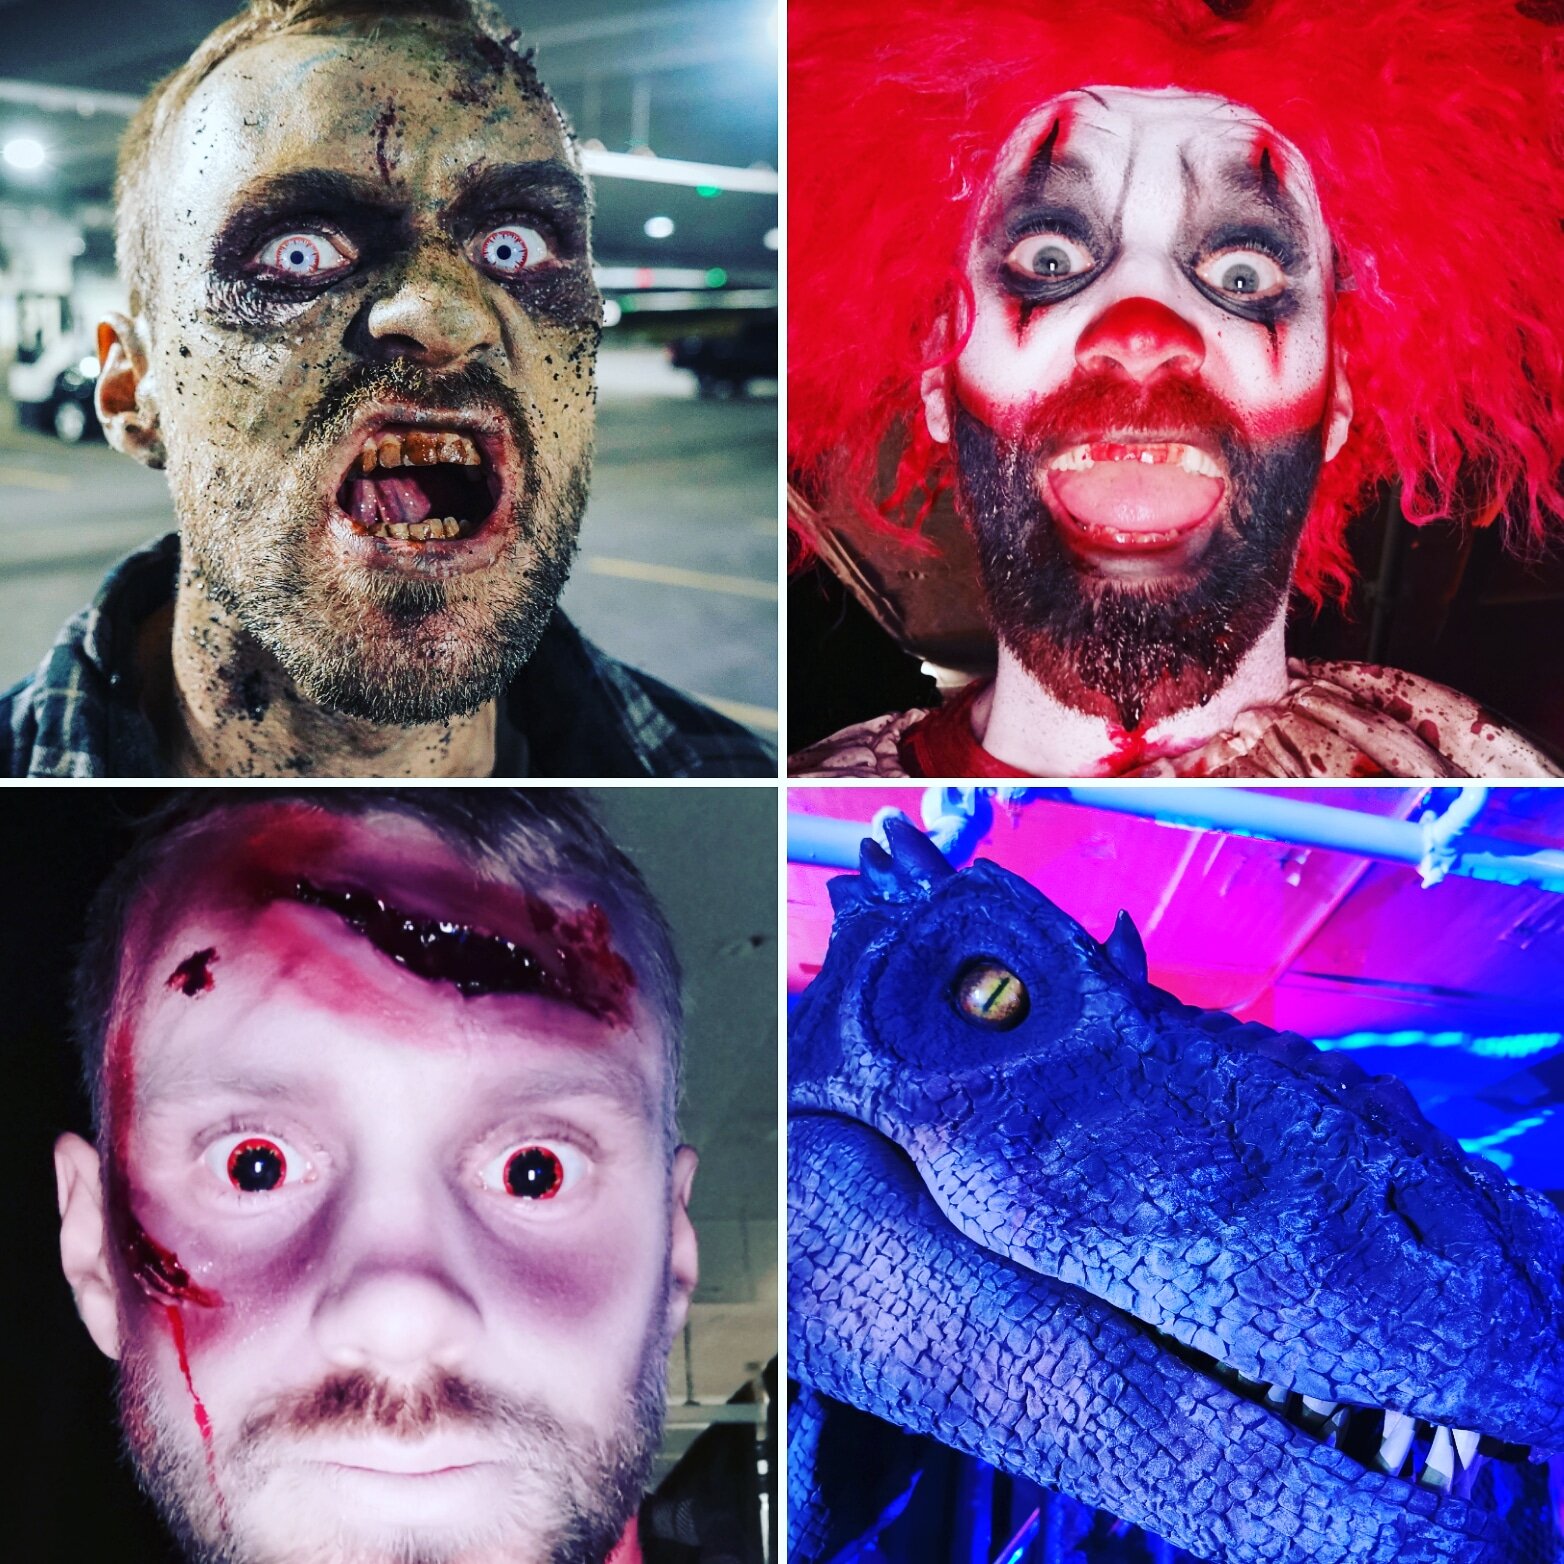  Some characters/makeups from Jestr Events Haunted Drive Thru   Halloween 2020 